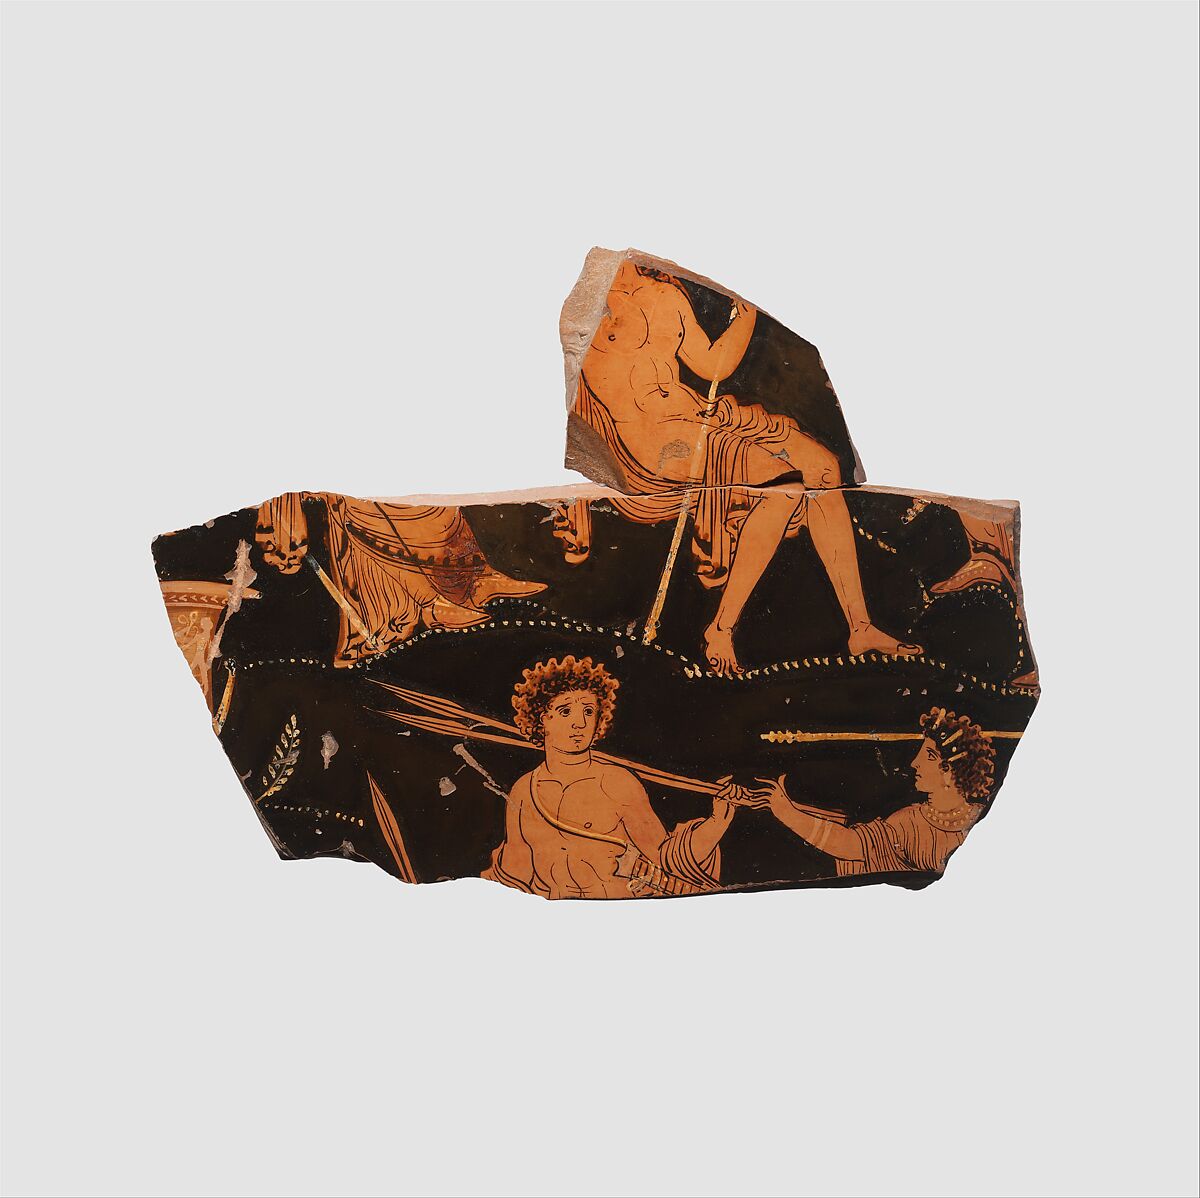 Fragment of a terrracotta volute-krater (bowl for mixing wine and water), Attributed to the Painter of the Dublin Situlae, Terracotta, Greek, South Italian, Apulian 